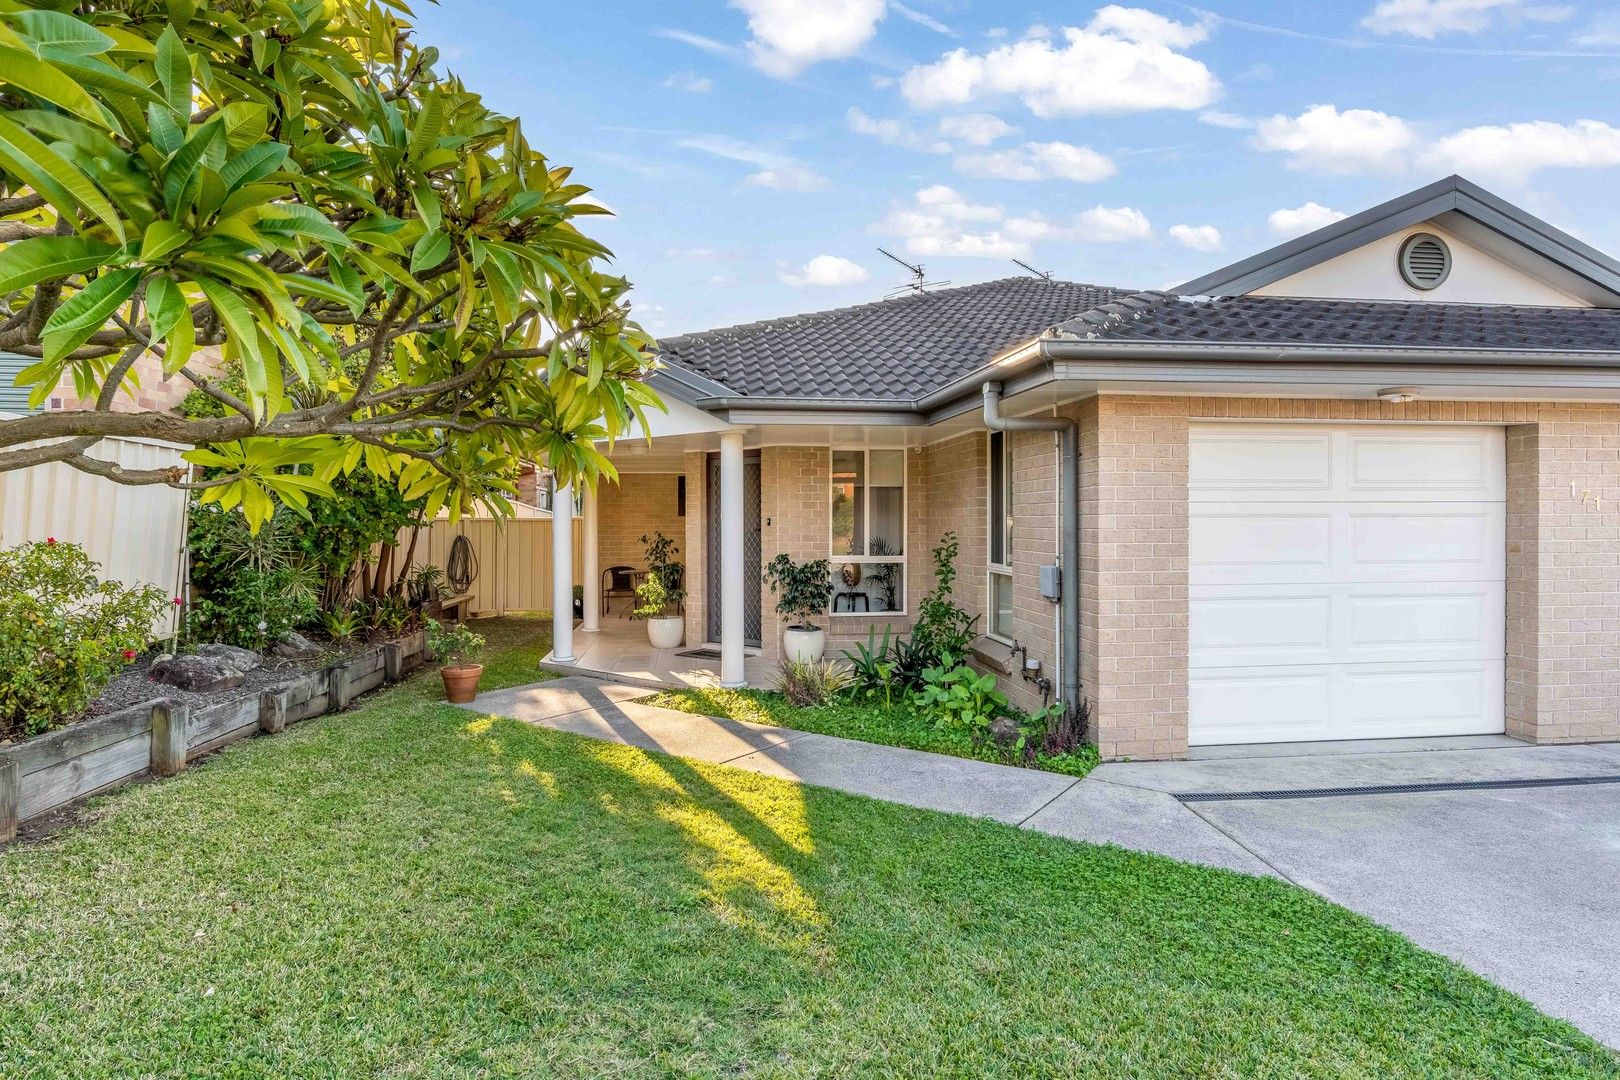 3 bedrooms Semi-Detached in 1/171 High Street EAST MAITLAND NSW, 2323